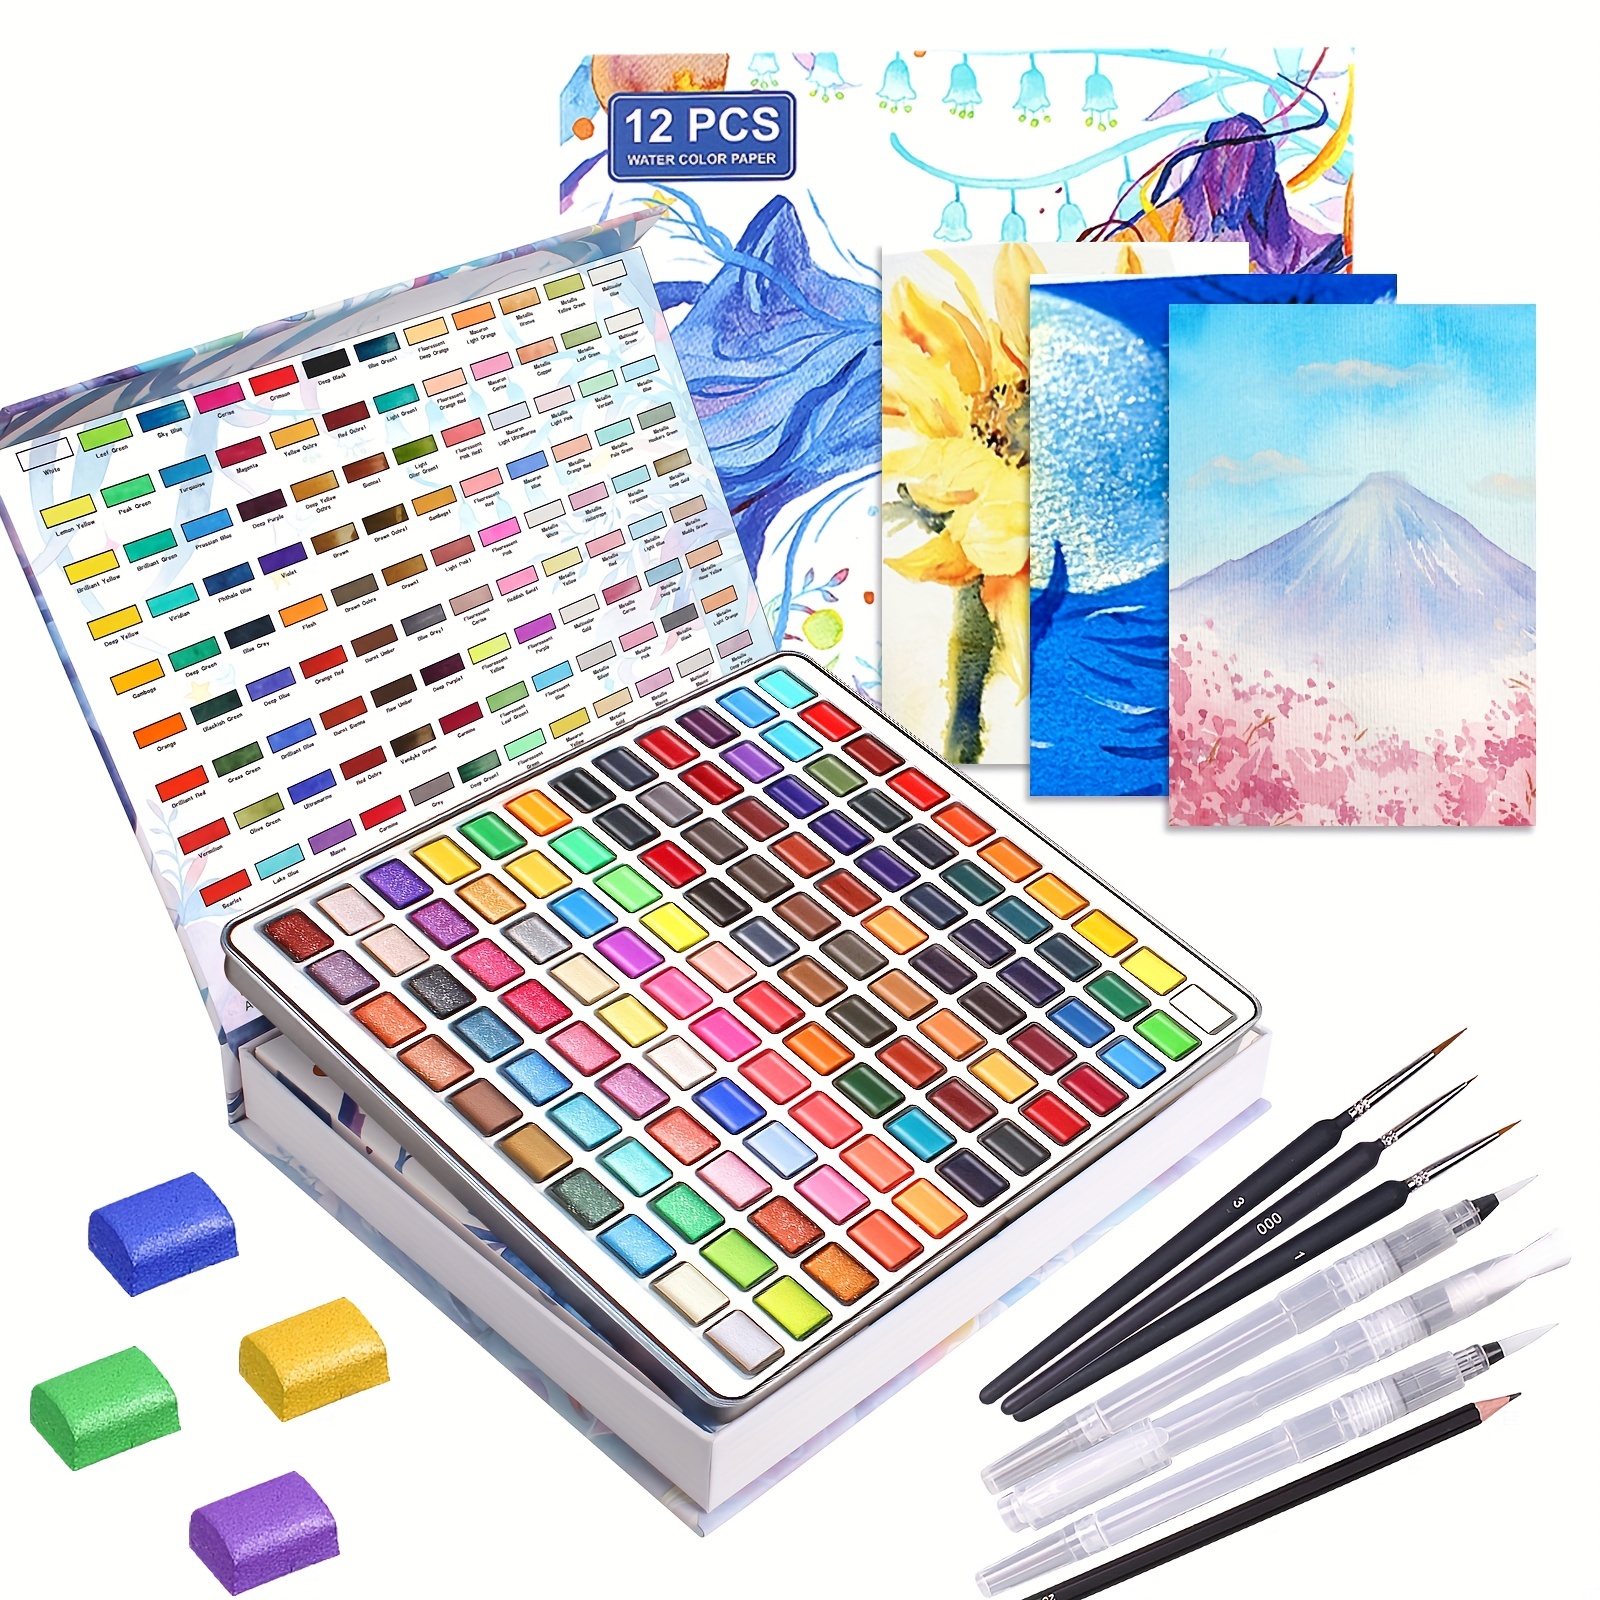 

Professional Art Watercolor Paint Gift Box Set - 120 Vibrant Colors - Metal Carrying Case - Very Beginner Lover & Professional Artist Watercolor Set, Back To School Gift For Students, Art Supplies